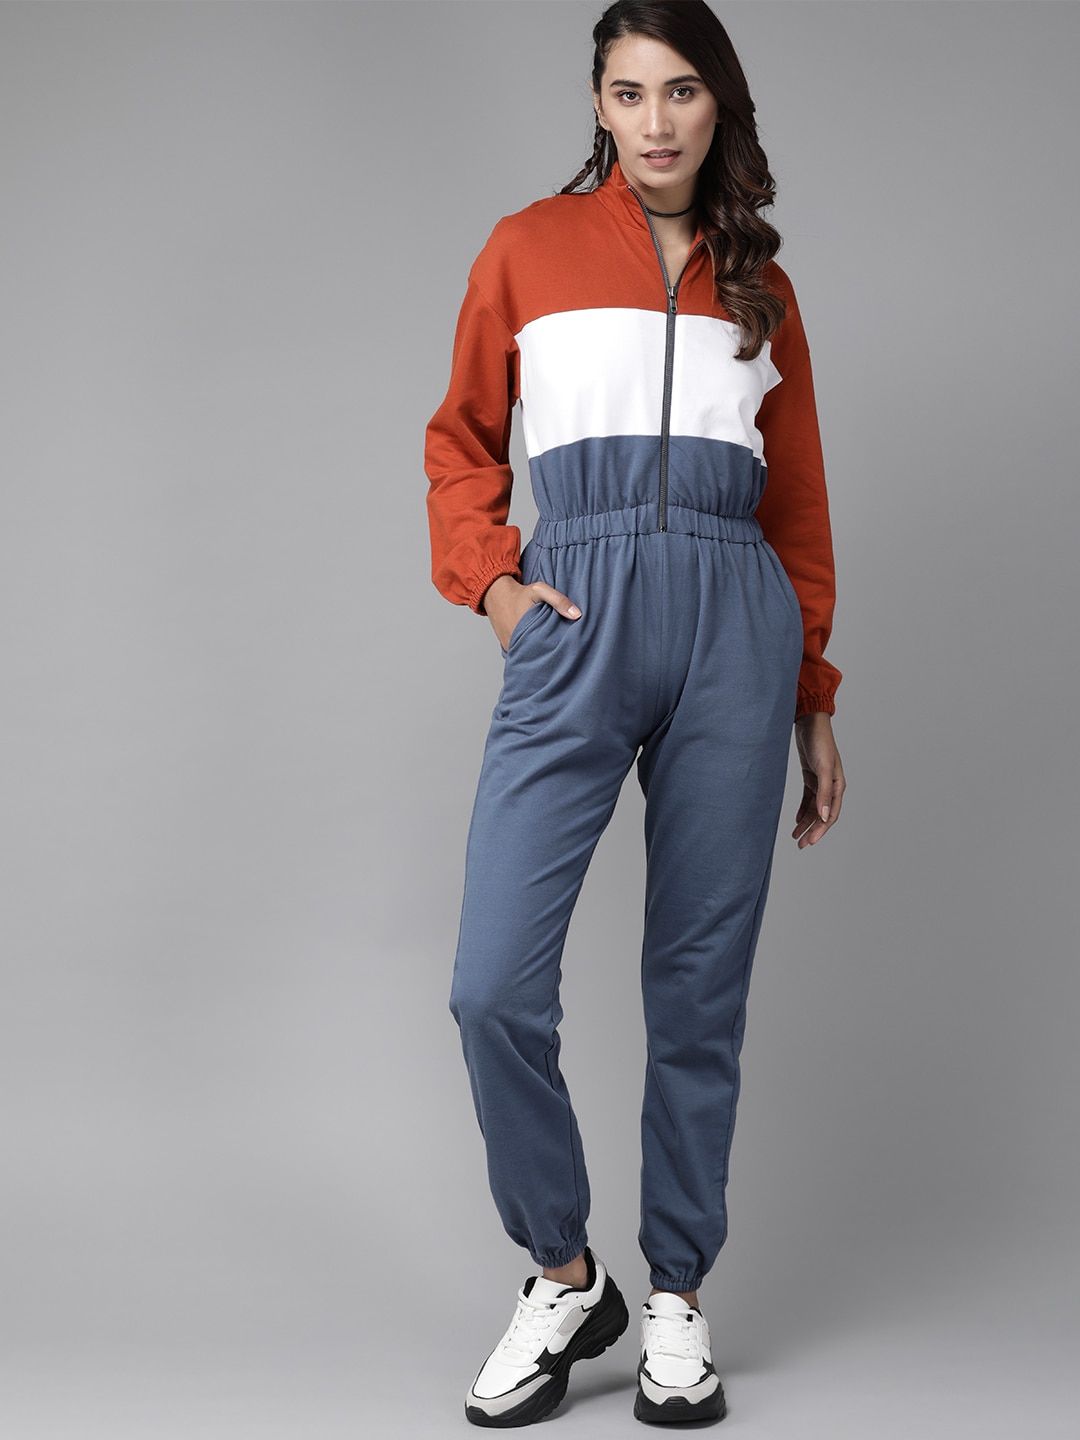 The Roadster Lifestyle Co Women Blue & Rust Orange Colourblocked Pure Cotton Knitted Basic Jogger Jumpsuit Price in India